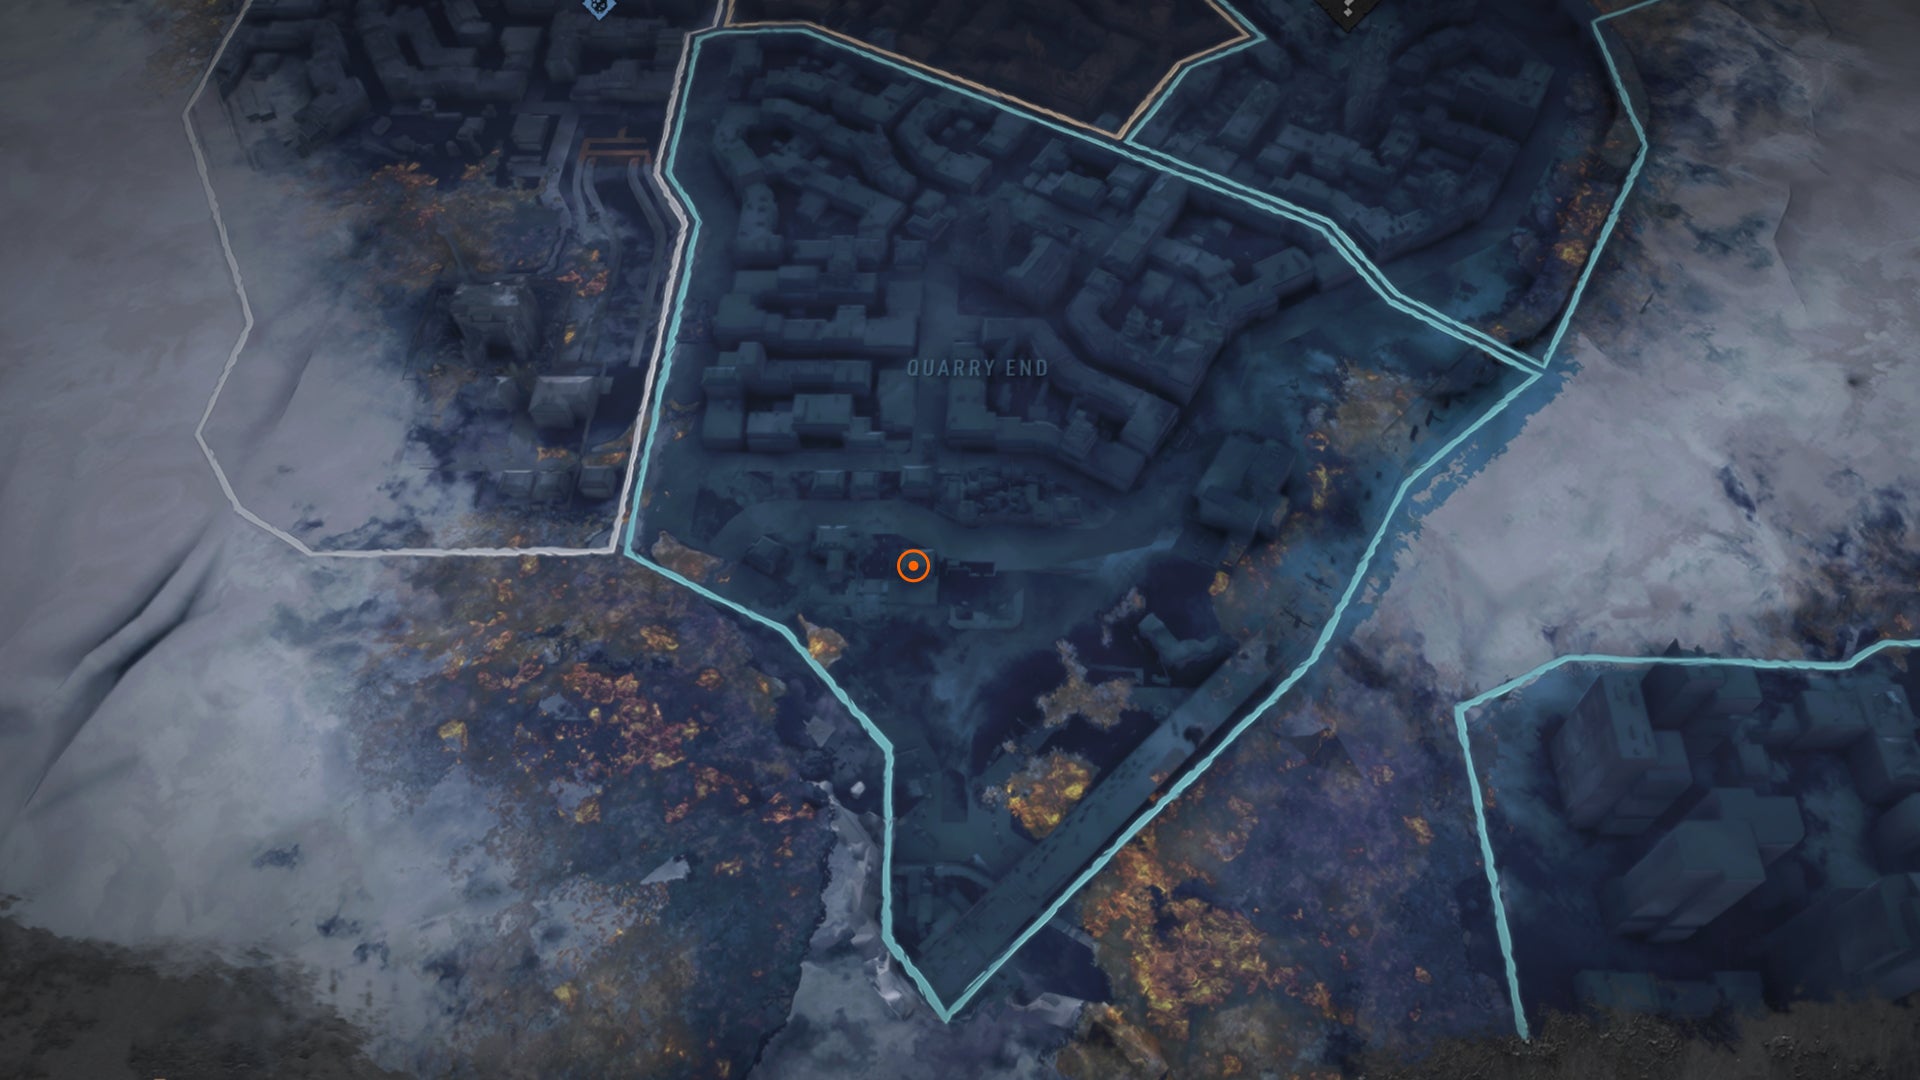 Part of the Dying Light 2 map, with a marker denoting the location of the South Quarry End safe.